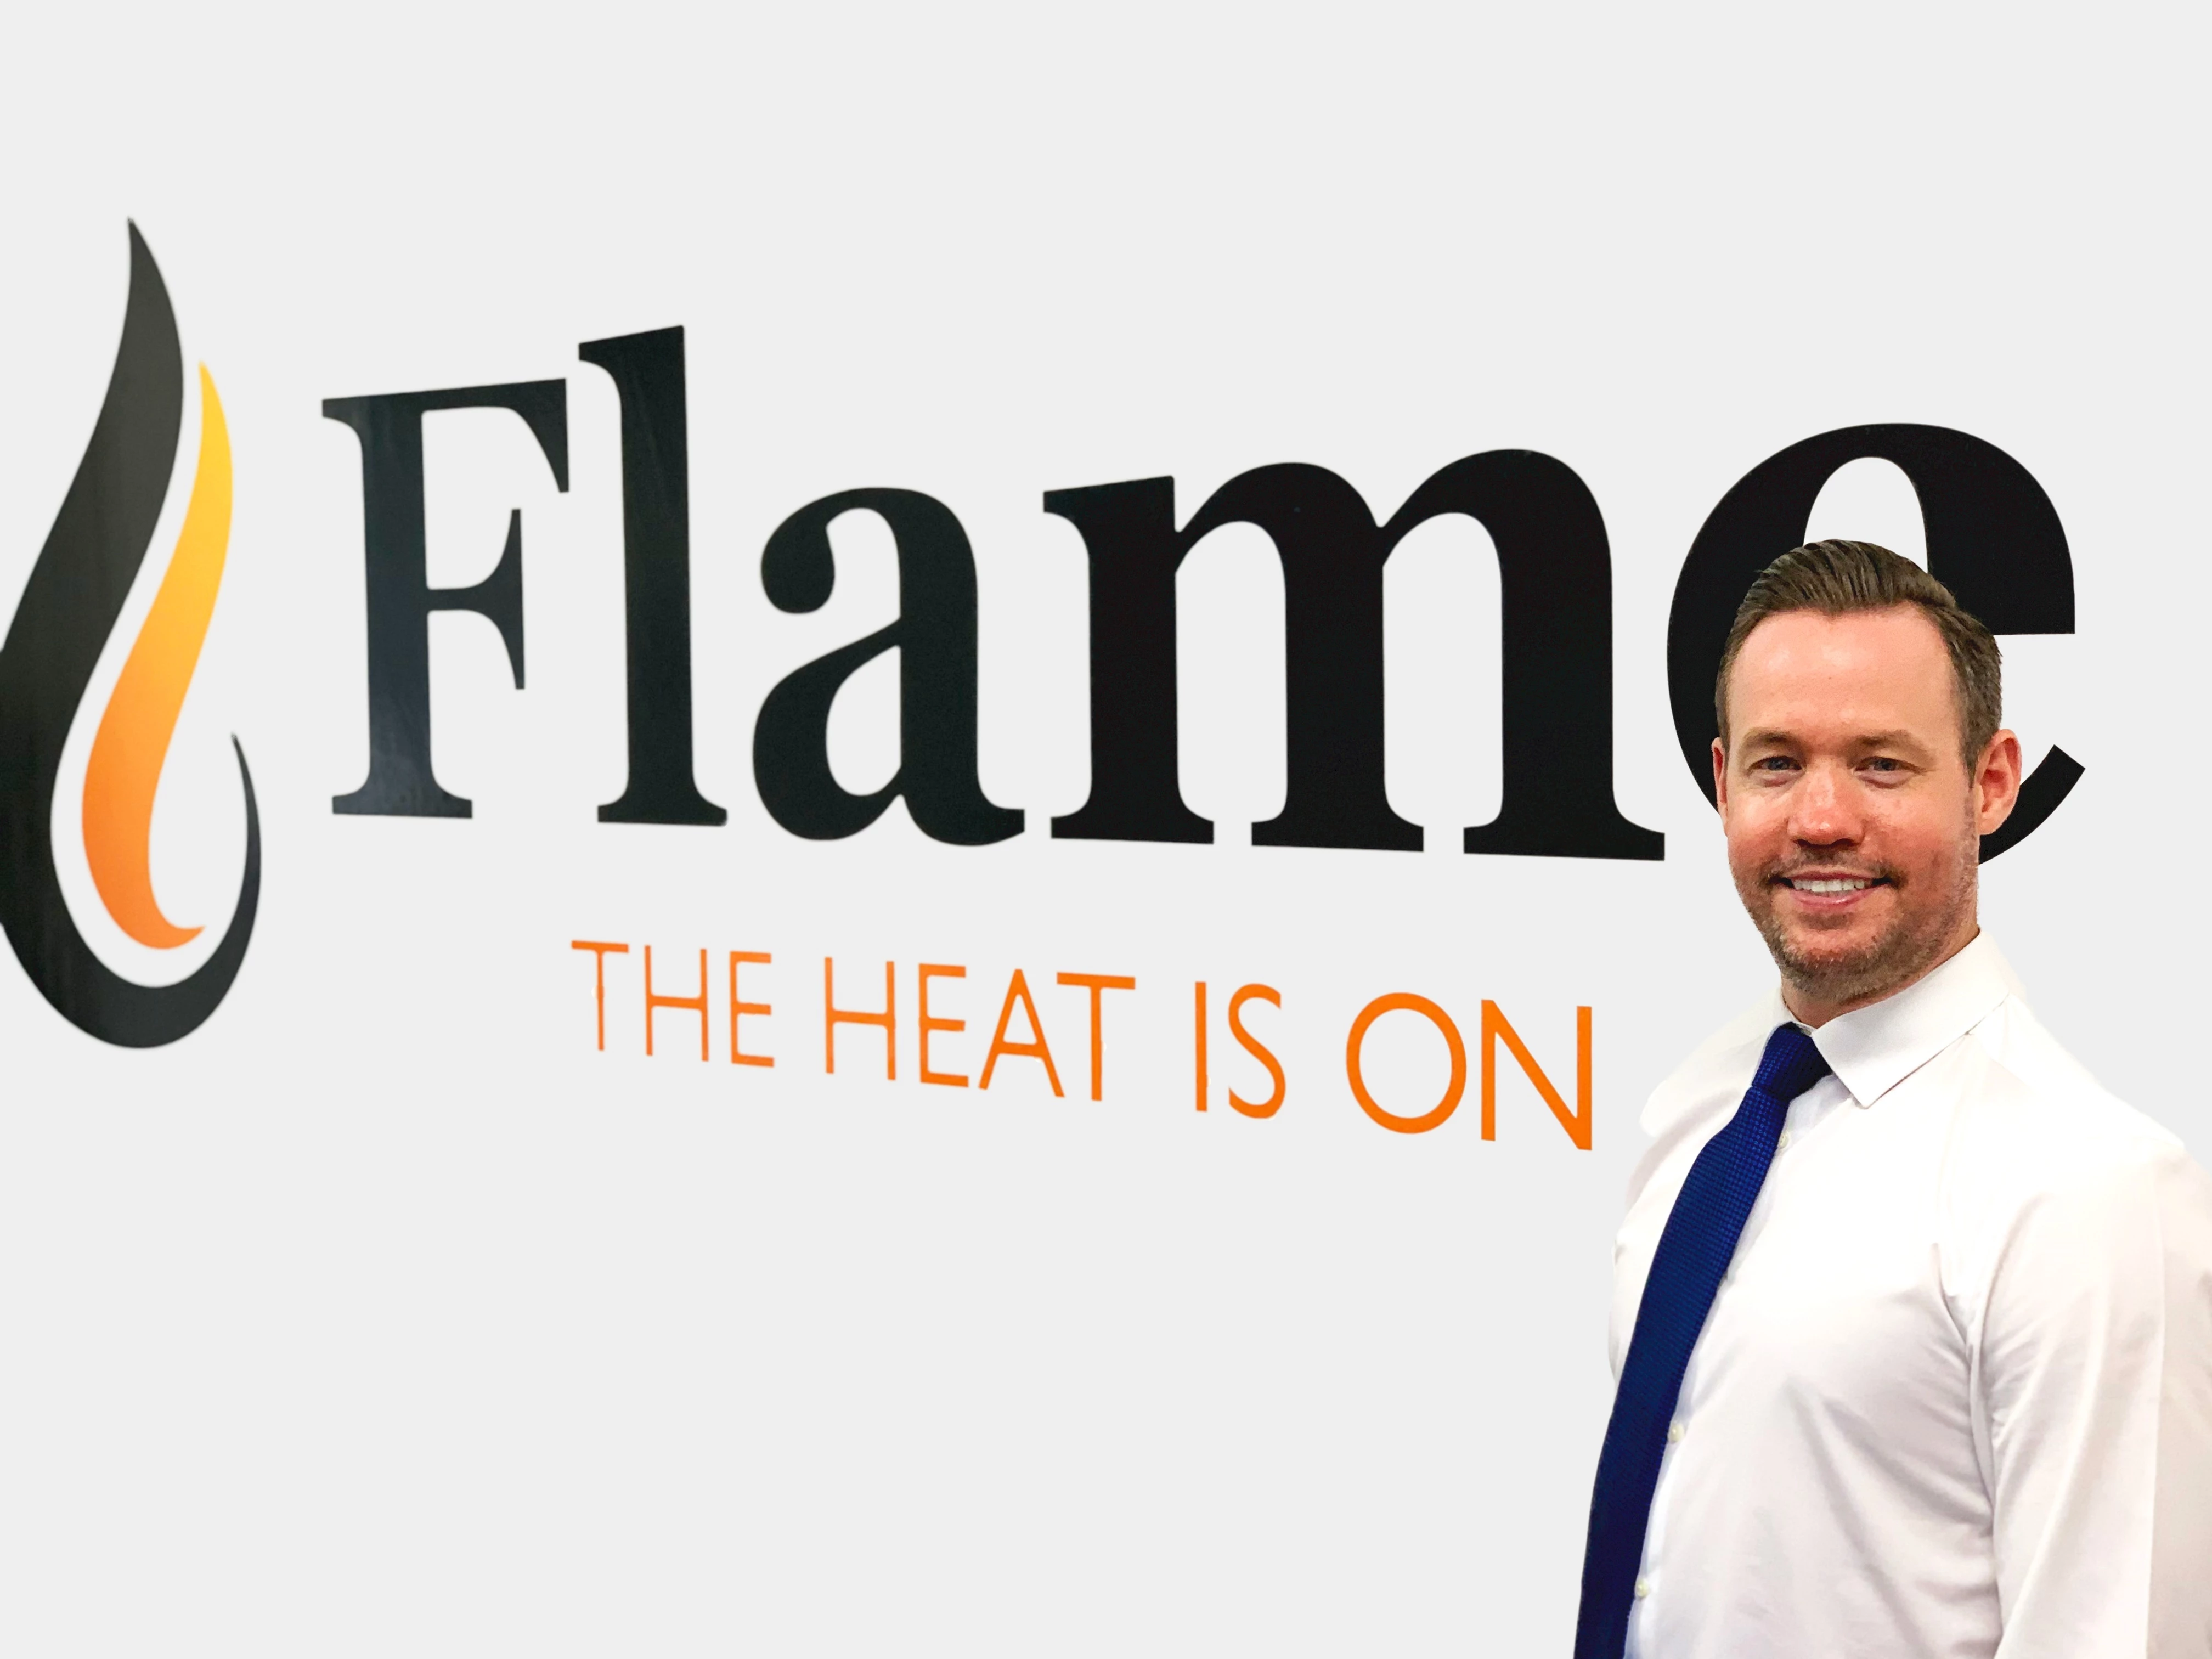 John Savage, founder and managing director of Flame Heating Group